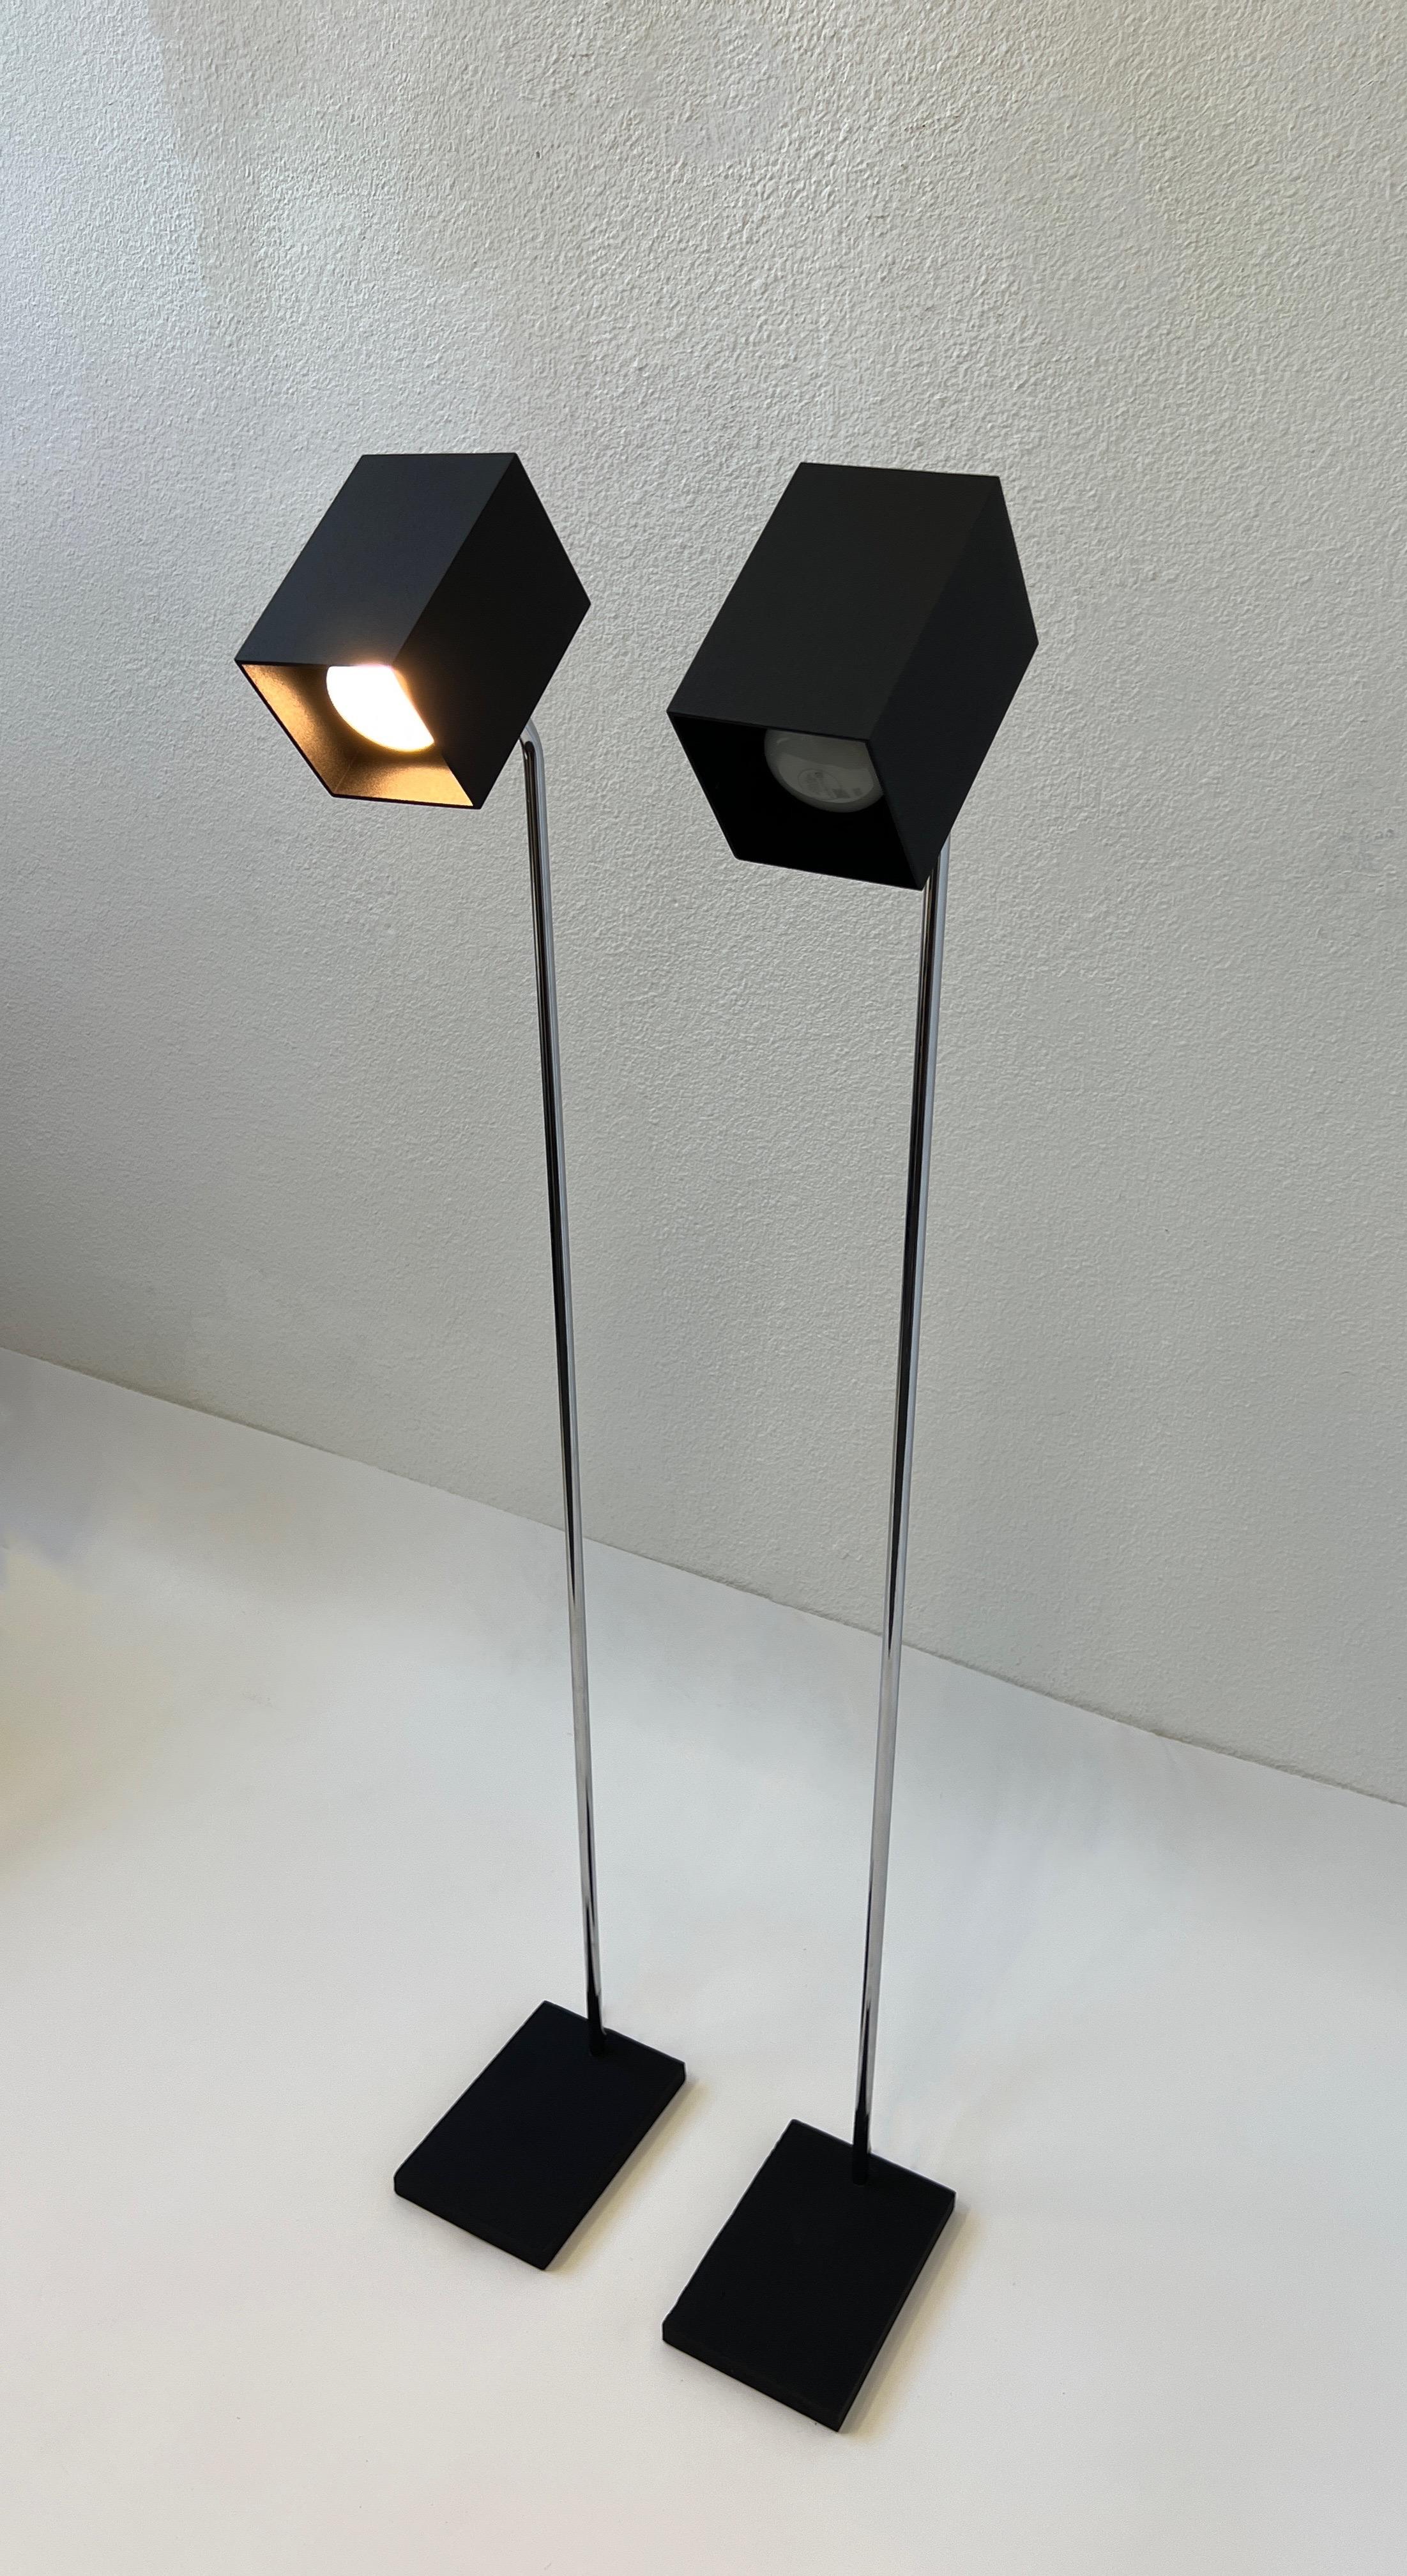 Powder-Coated Pair of Black and Chrome Floor Lamps by Kovacs